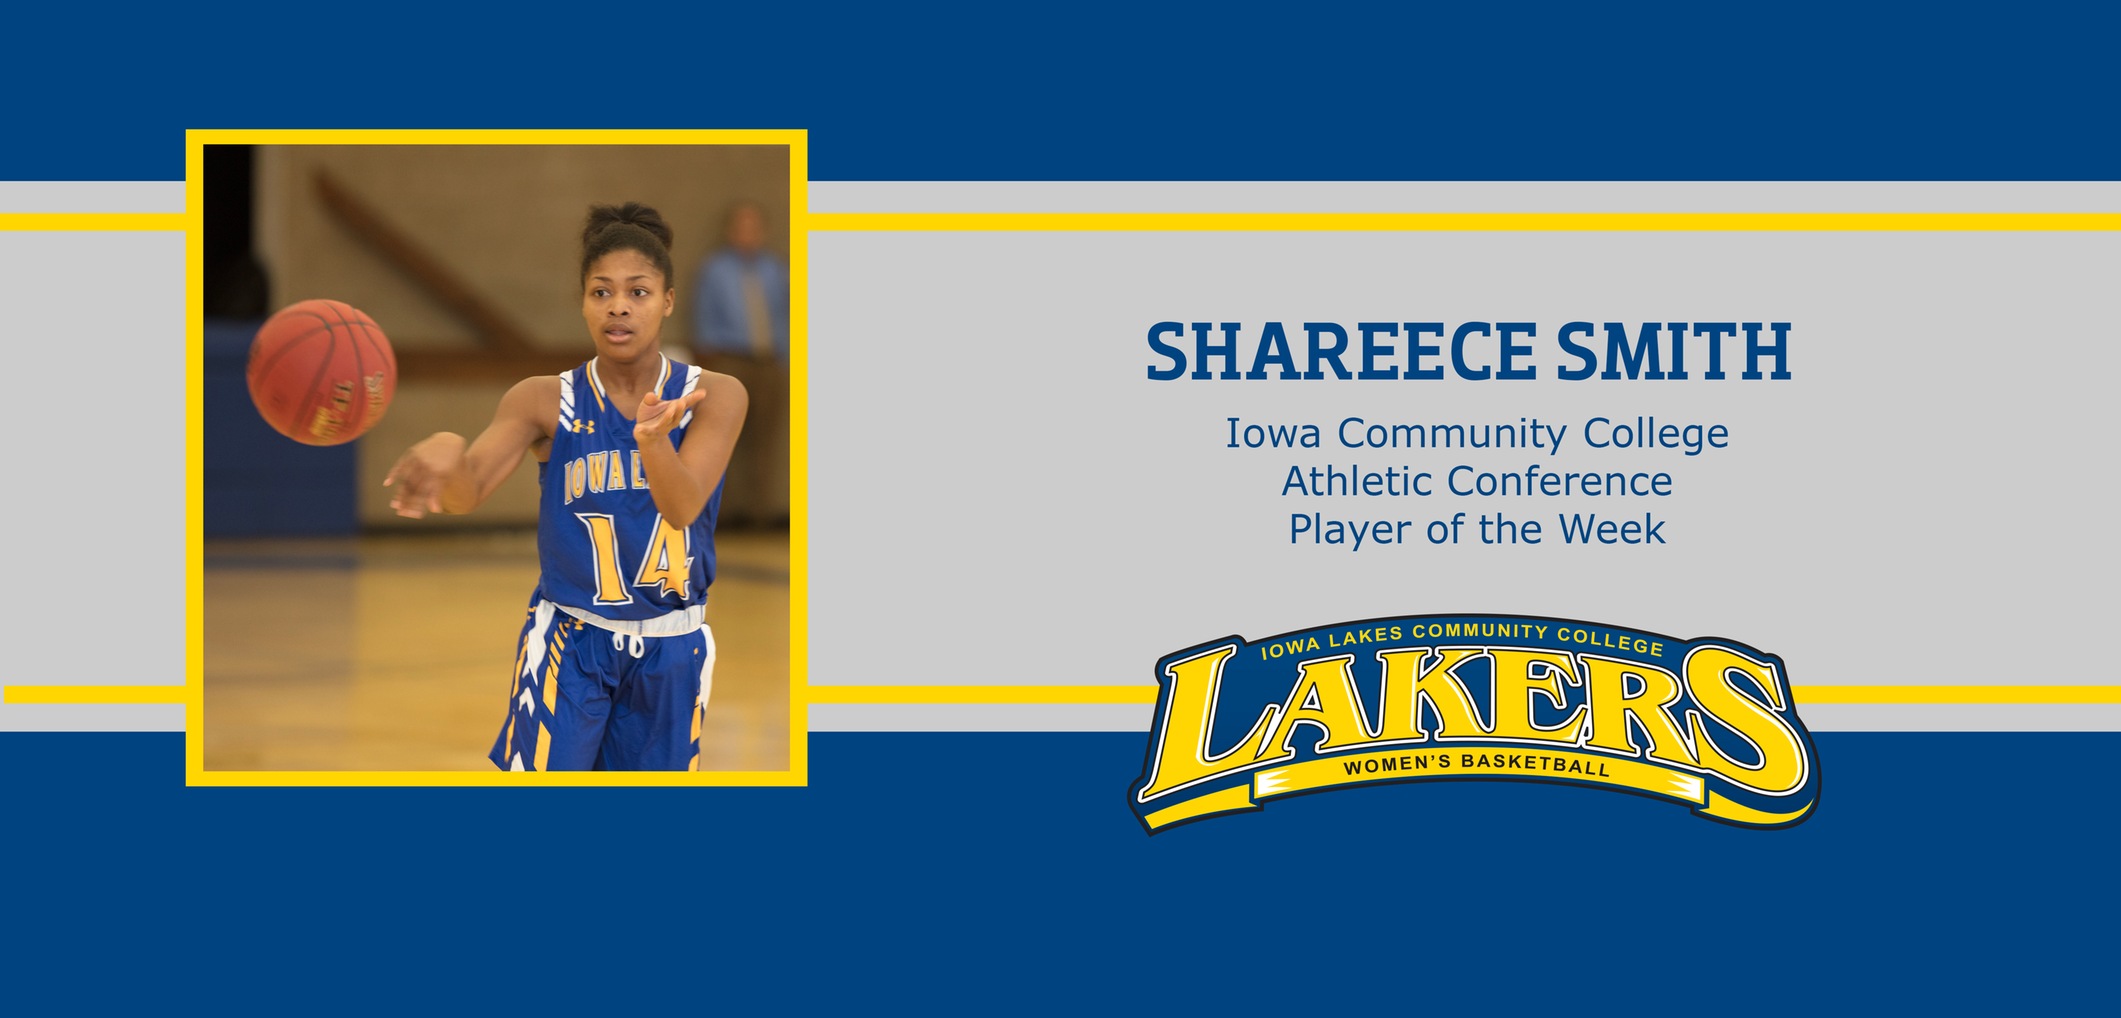 Shareece Smith, a freshman from Fort Dodge, IA was selected as the ICCAC Player of the Week. 